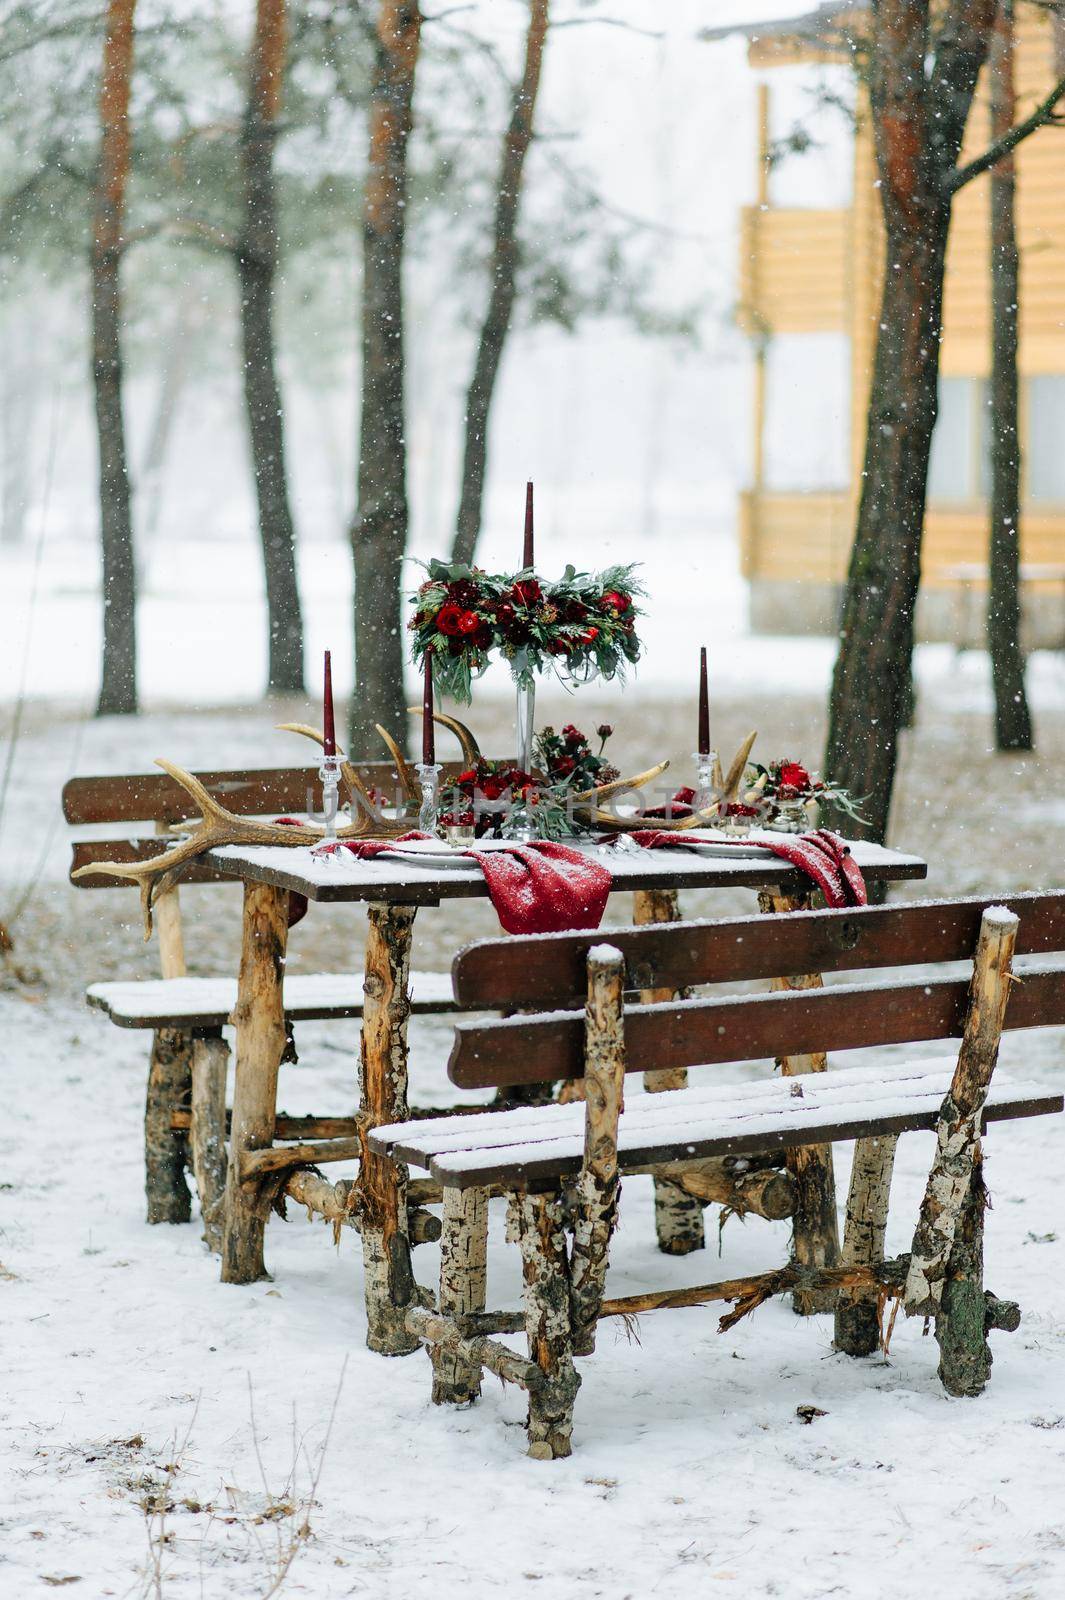 Winter Wedding decor with red roses by wolfhound9111